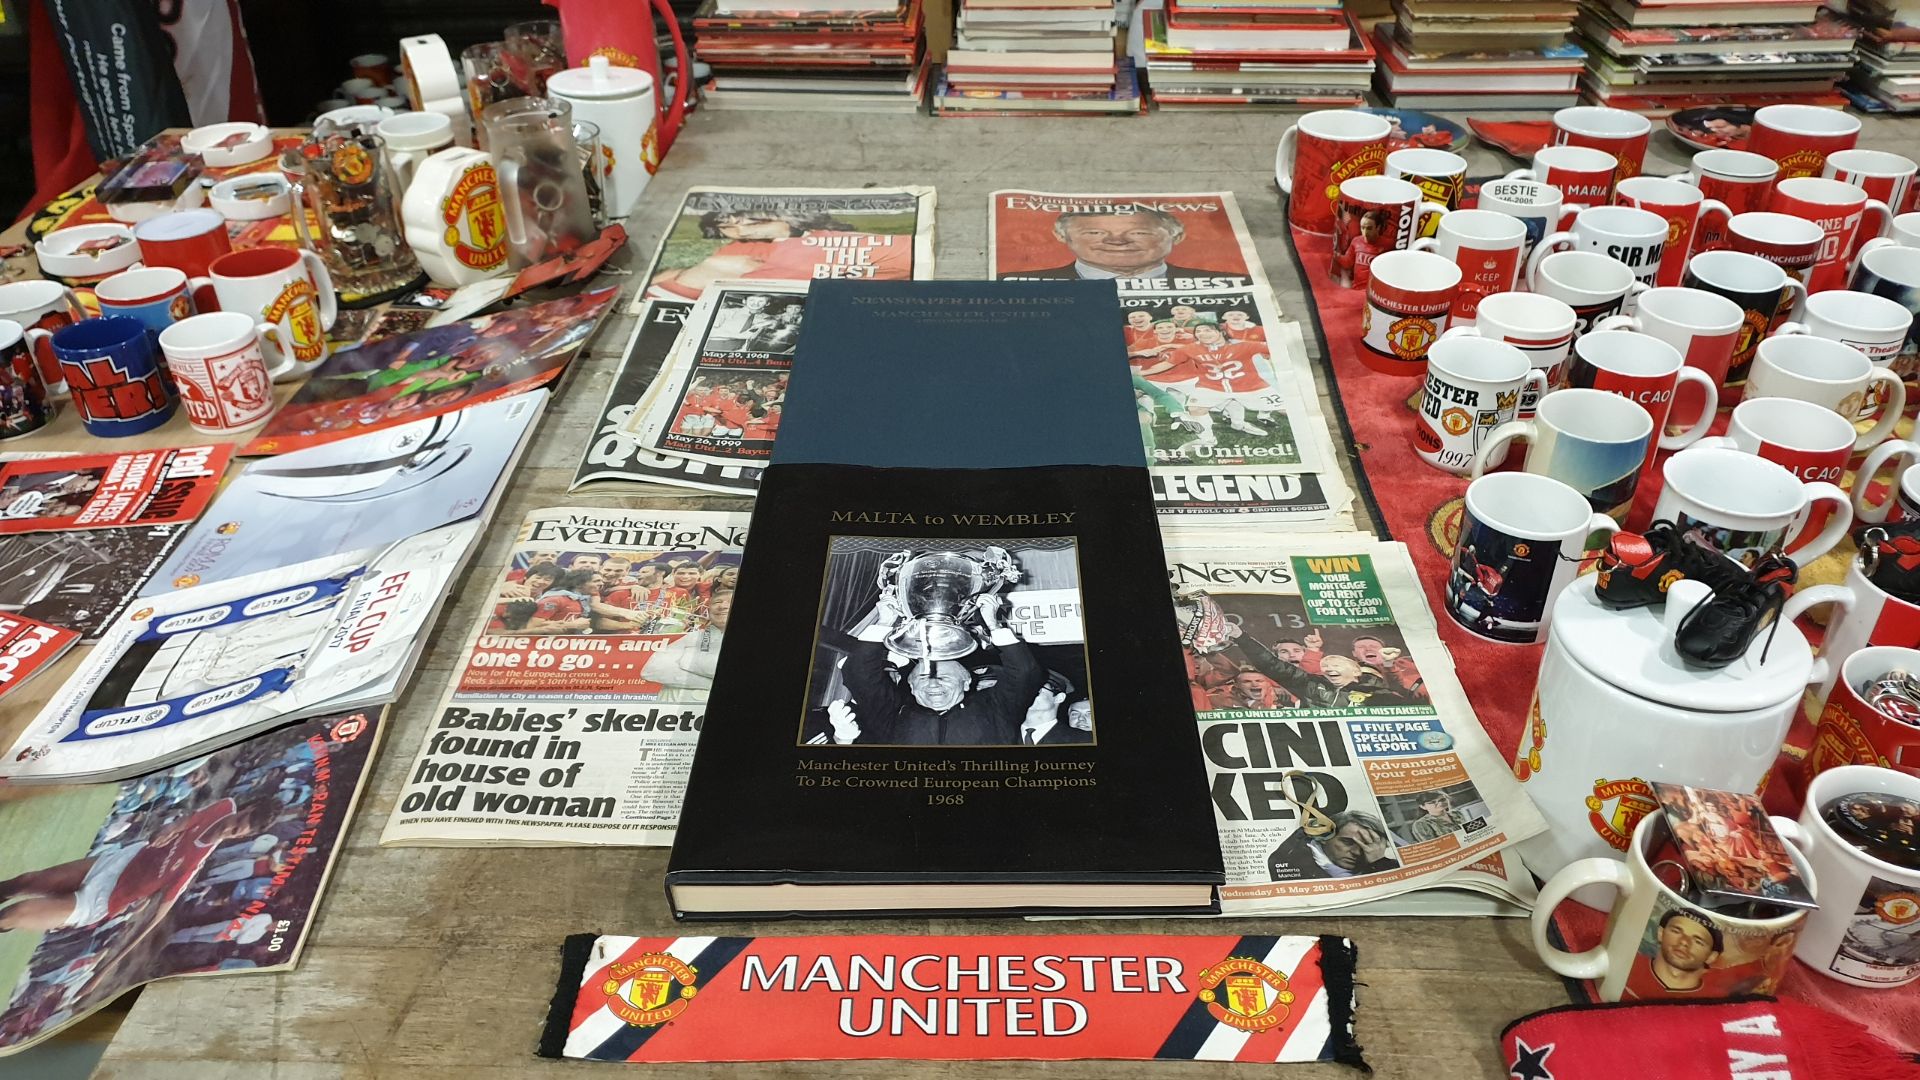 MANCHESTER UNITED LOT CONTAINING, MANCHESTER UNITED NEWSPAPER HEADLINES A HISTORY SINCE 1909,